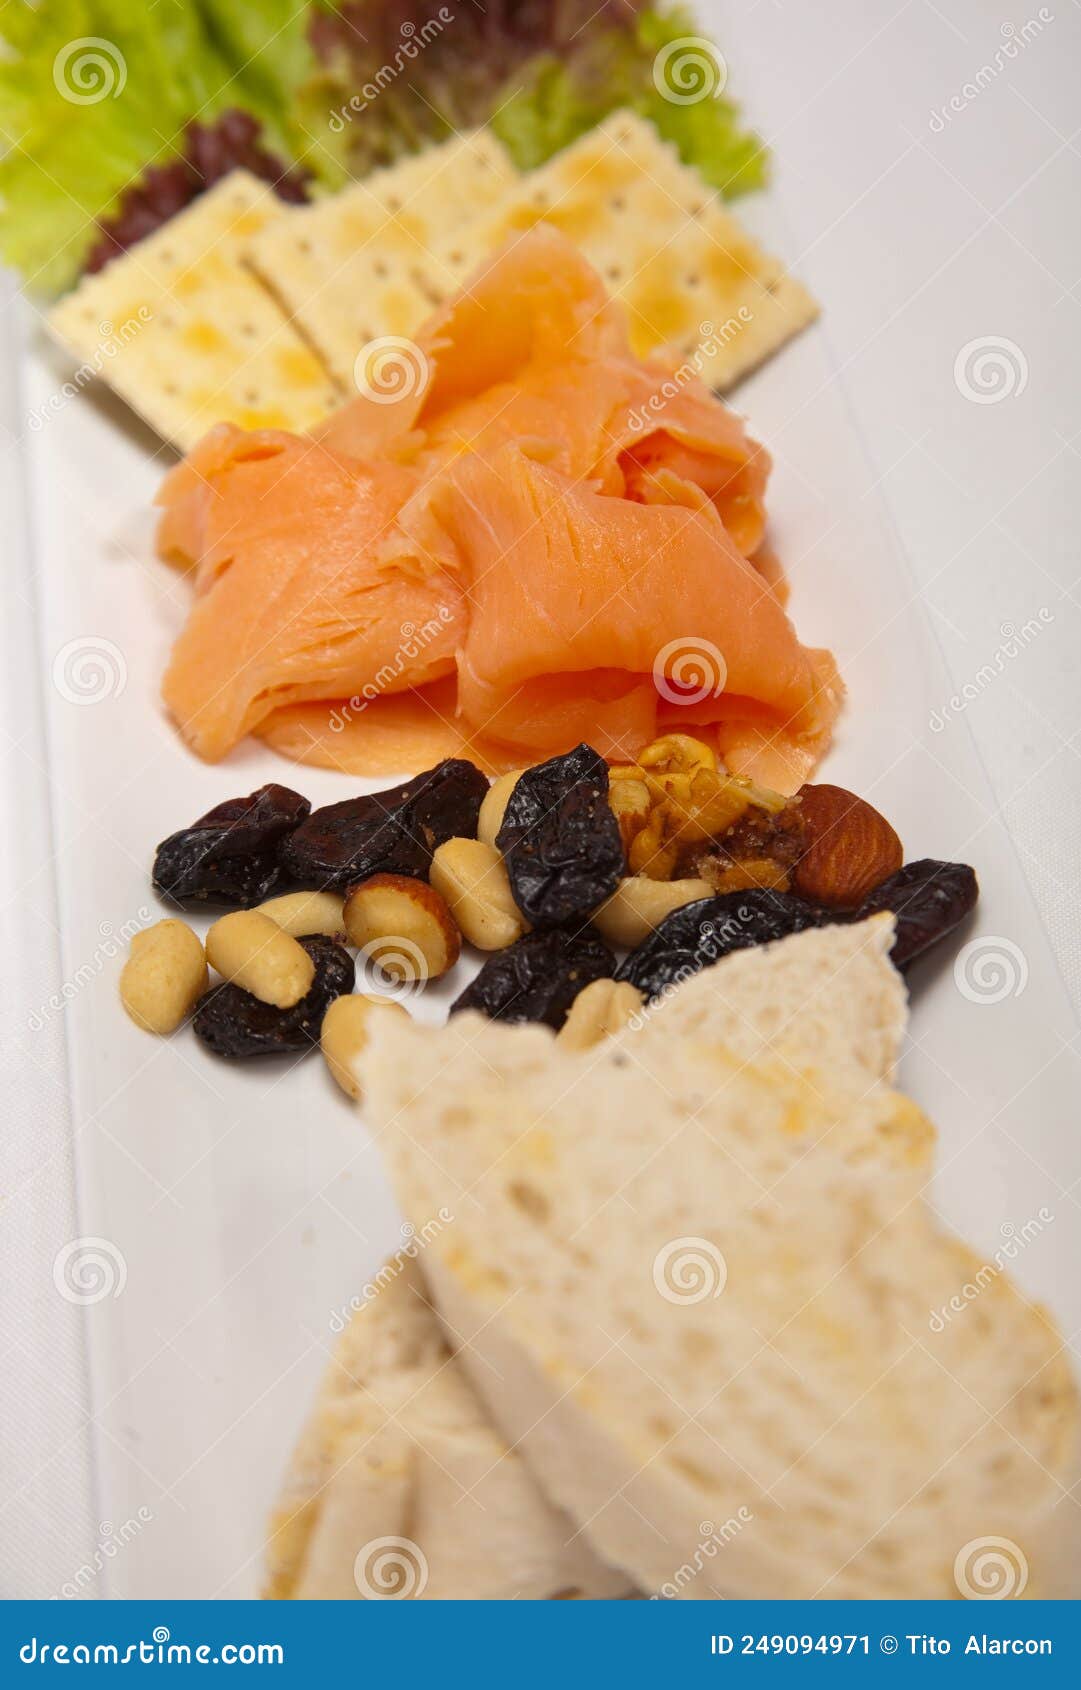 salmon appetizer and bread, almonds